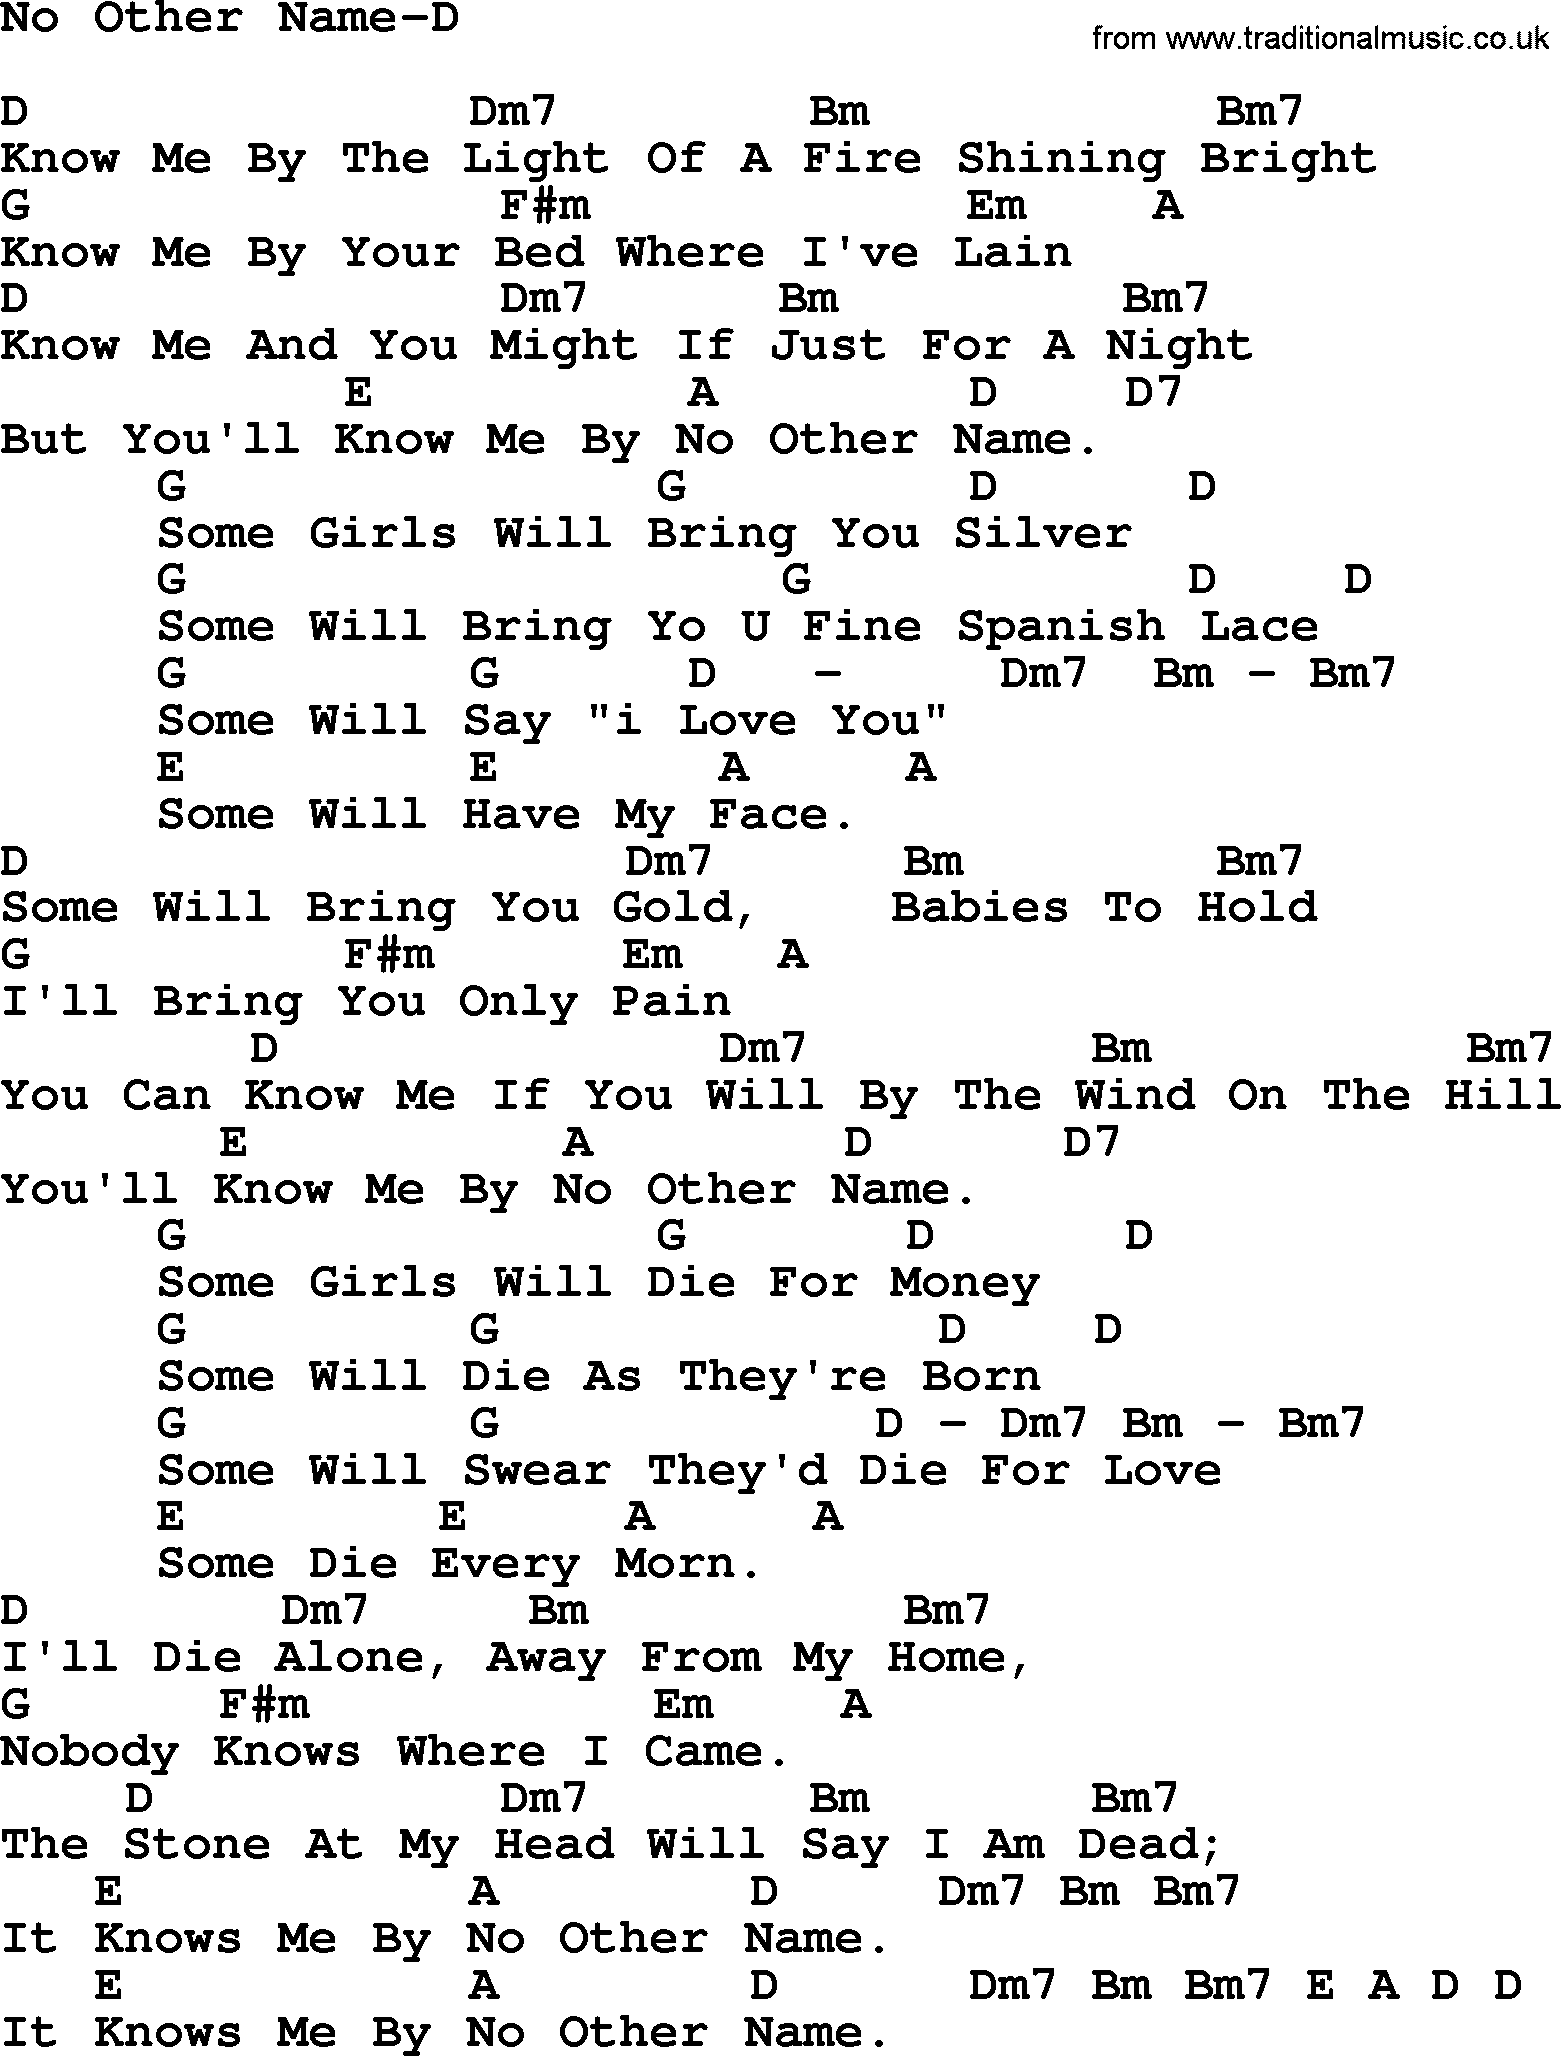 Peter, Paul and Mary song No Other Name D, lyrics and chords